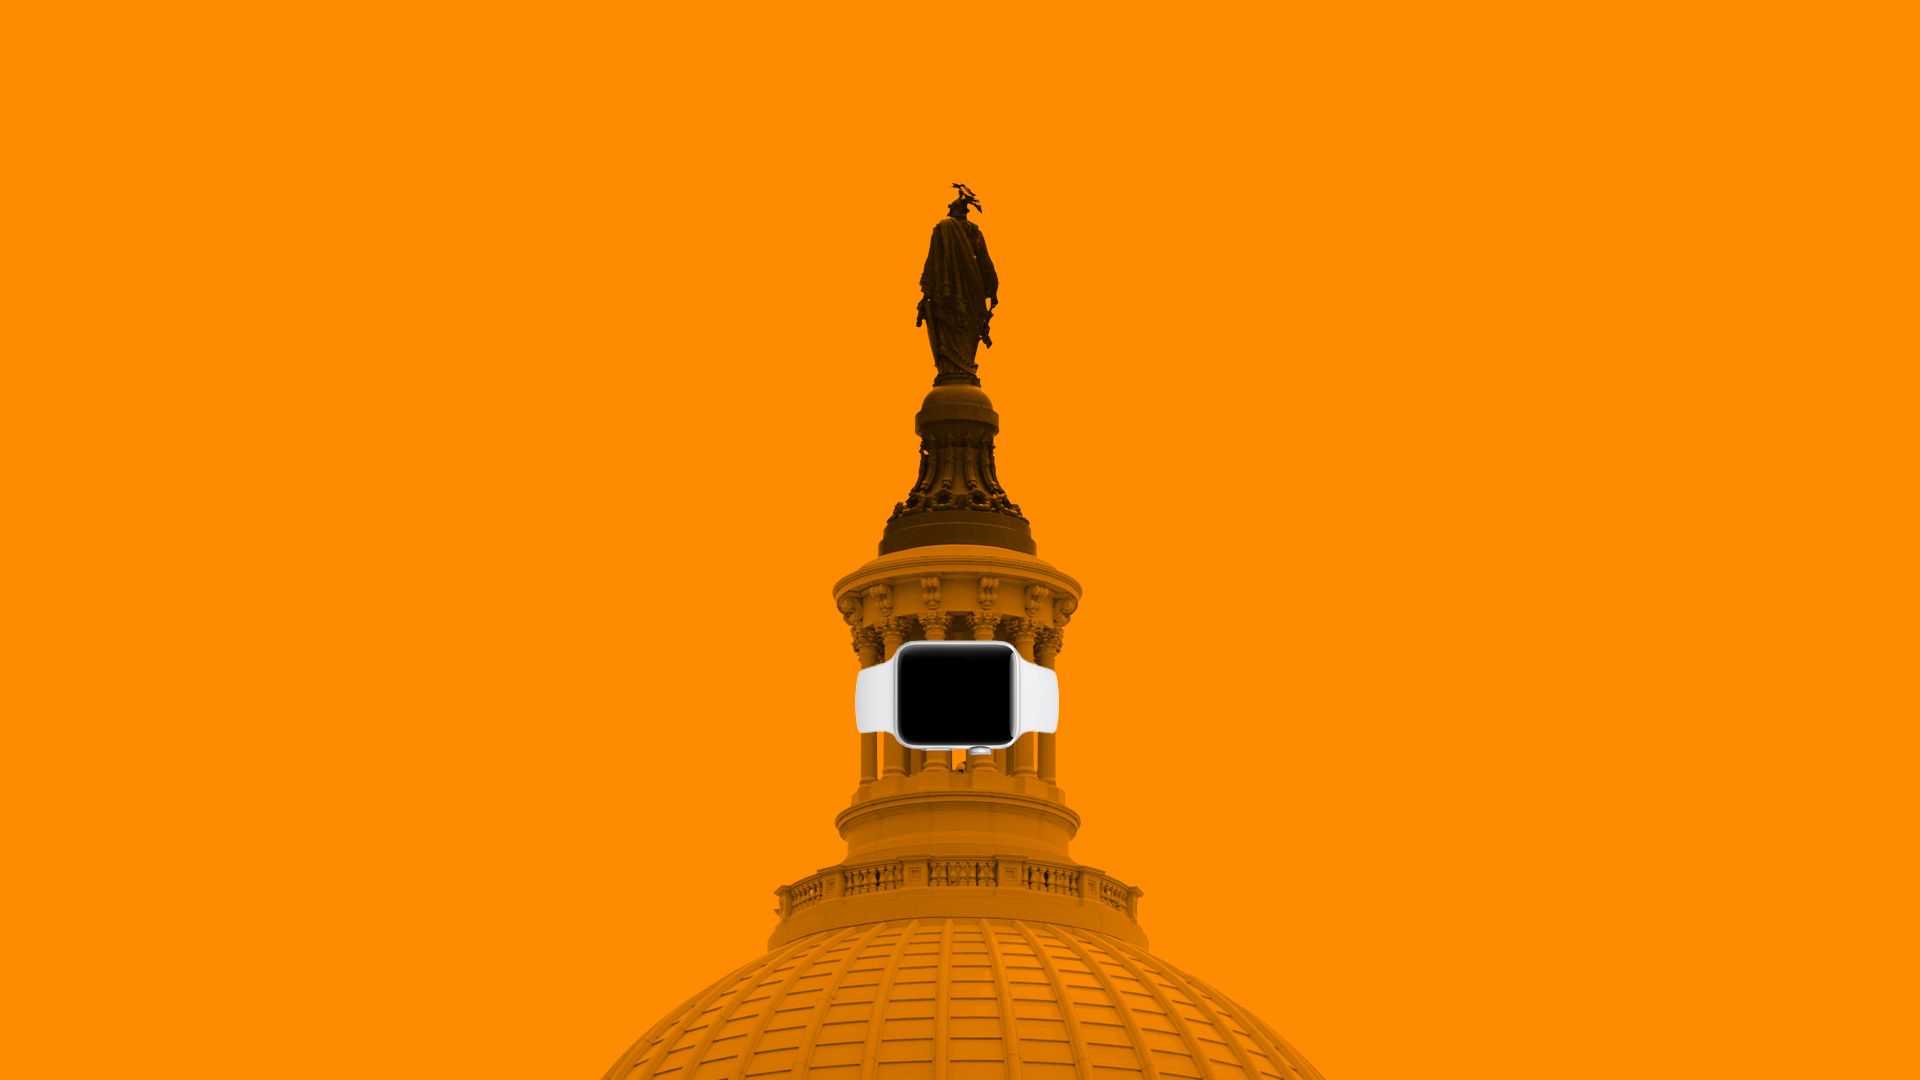 Illustration of the U.S. Capitol dome wearing an Apple Watch